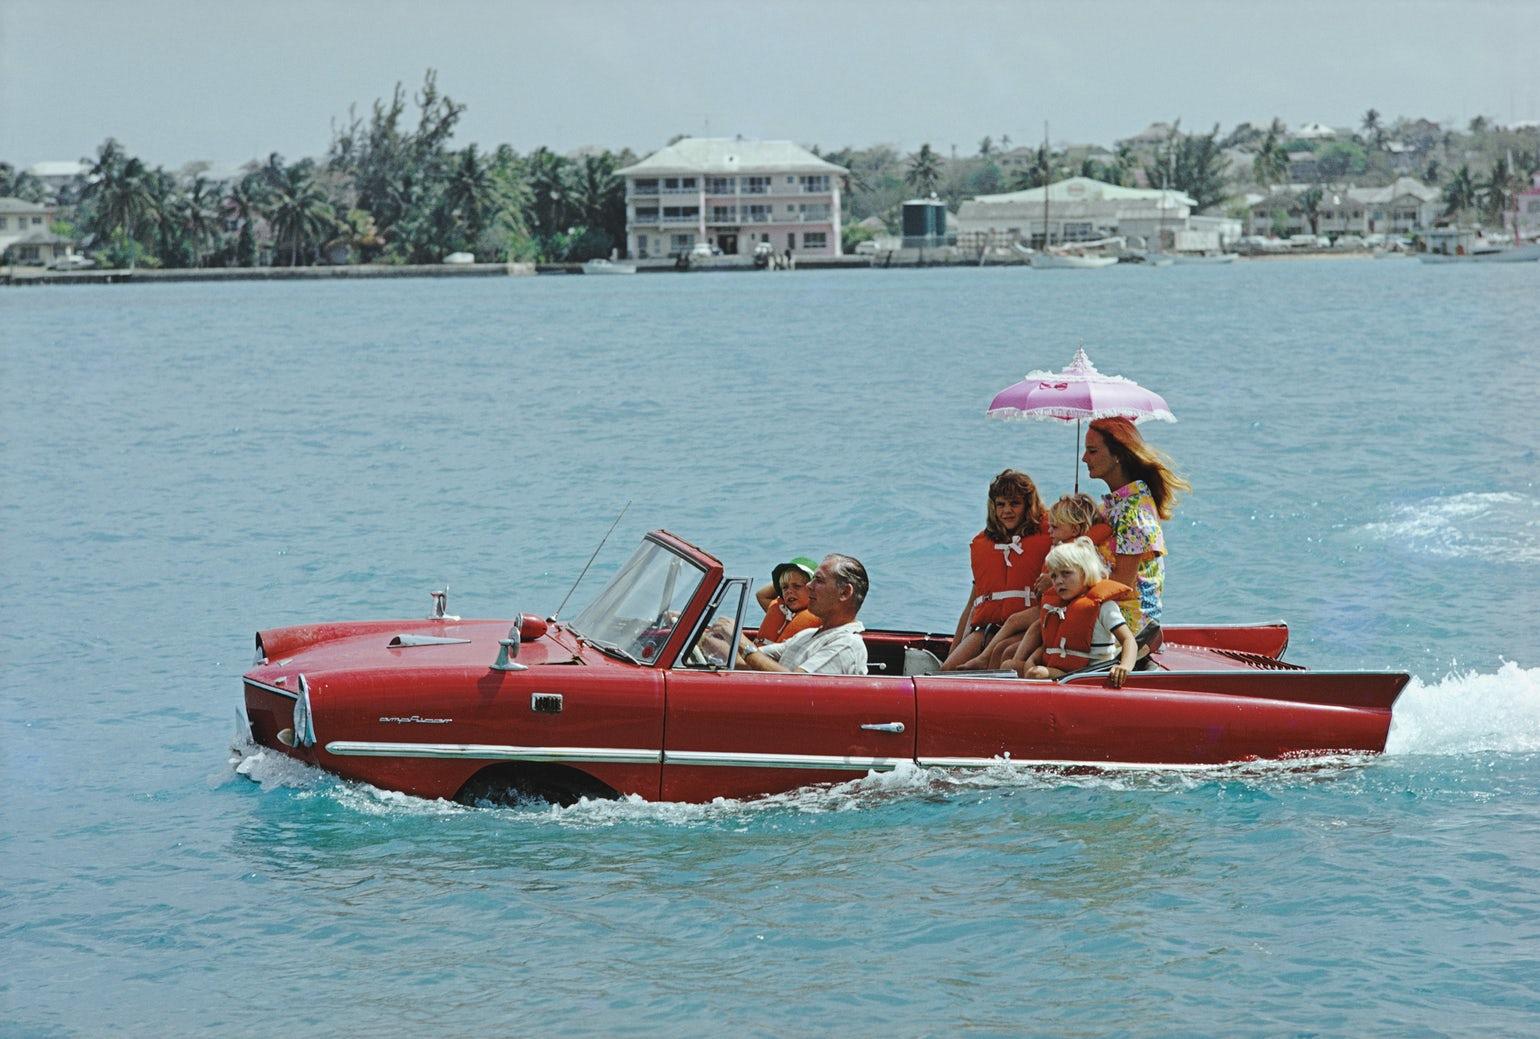 Sea Drive, 1967 by Slim Aarons, Printed Later.
Film producer Kevin McClory takes his wife Bobo Sigrist and their family for a drive in an 'Amphicar' across the harbour at Nassau. The children are Bianca Juarez (Bobo's daughter from another